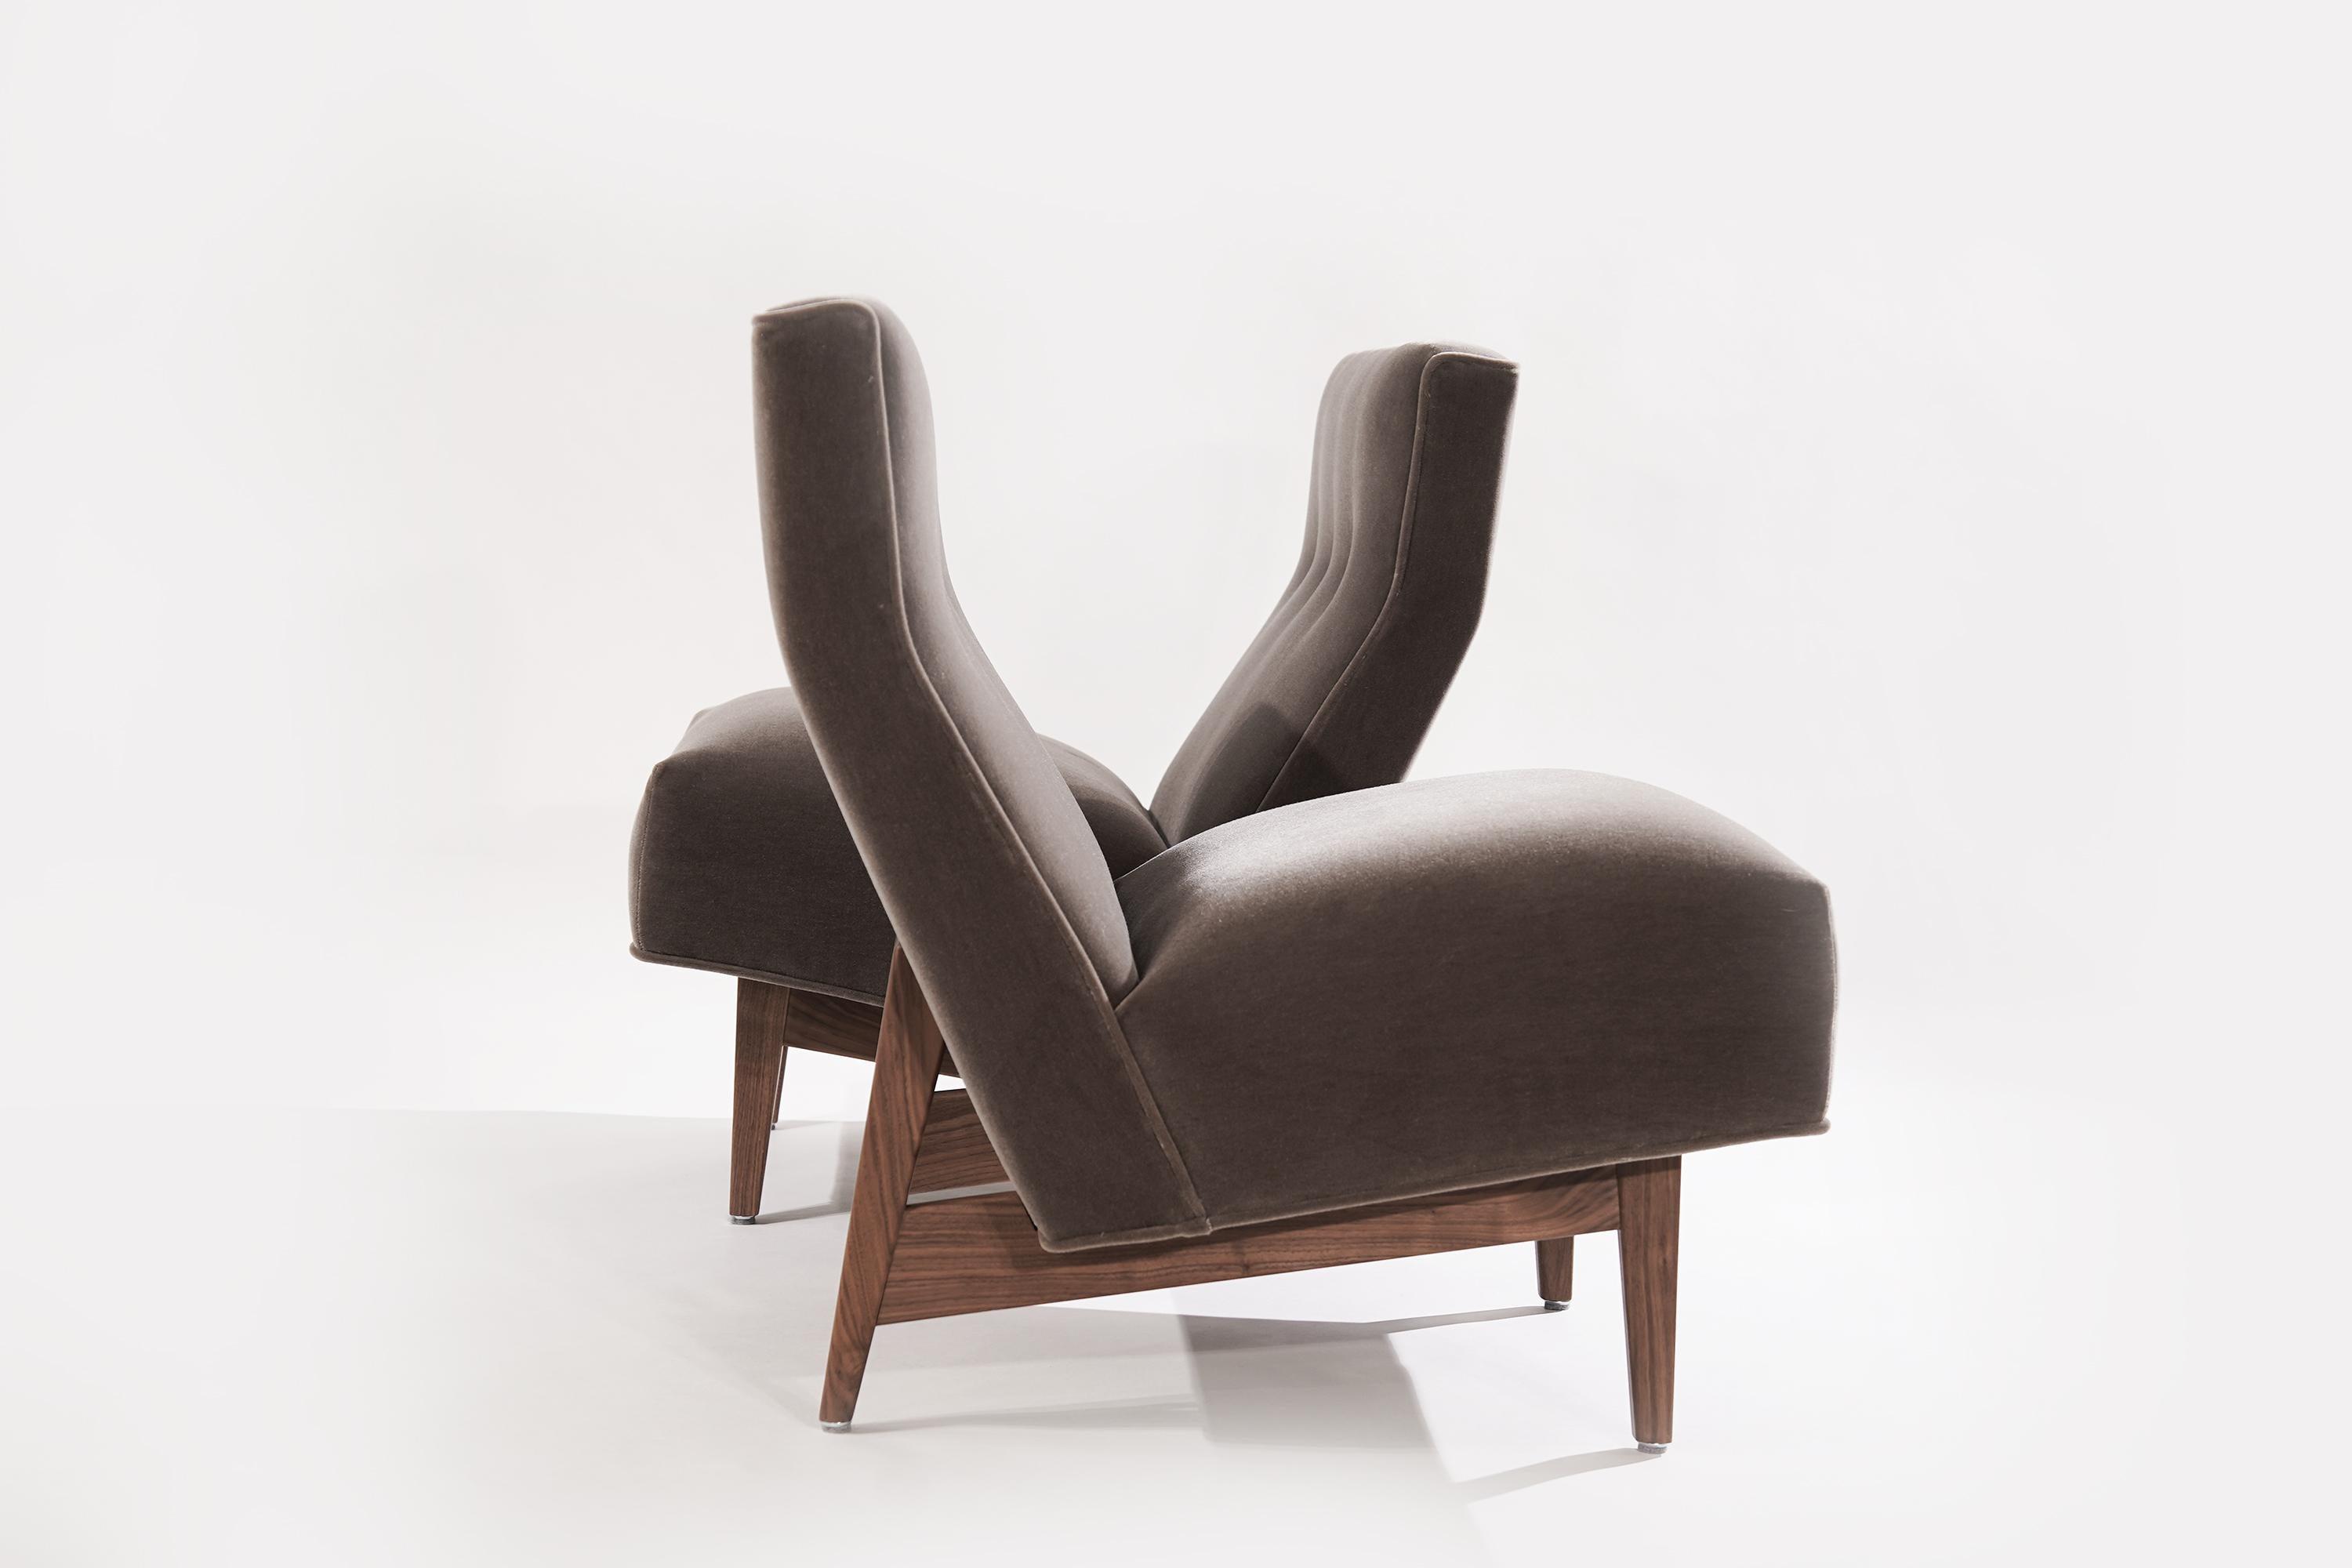 20th Century Classic Slipper Chairs by Jens Risom in Mohair, circa 1950s